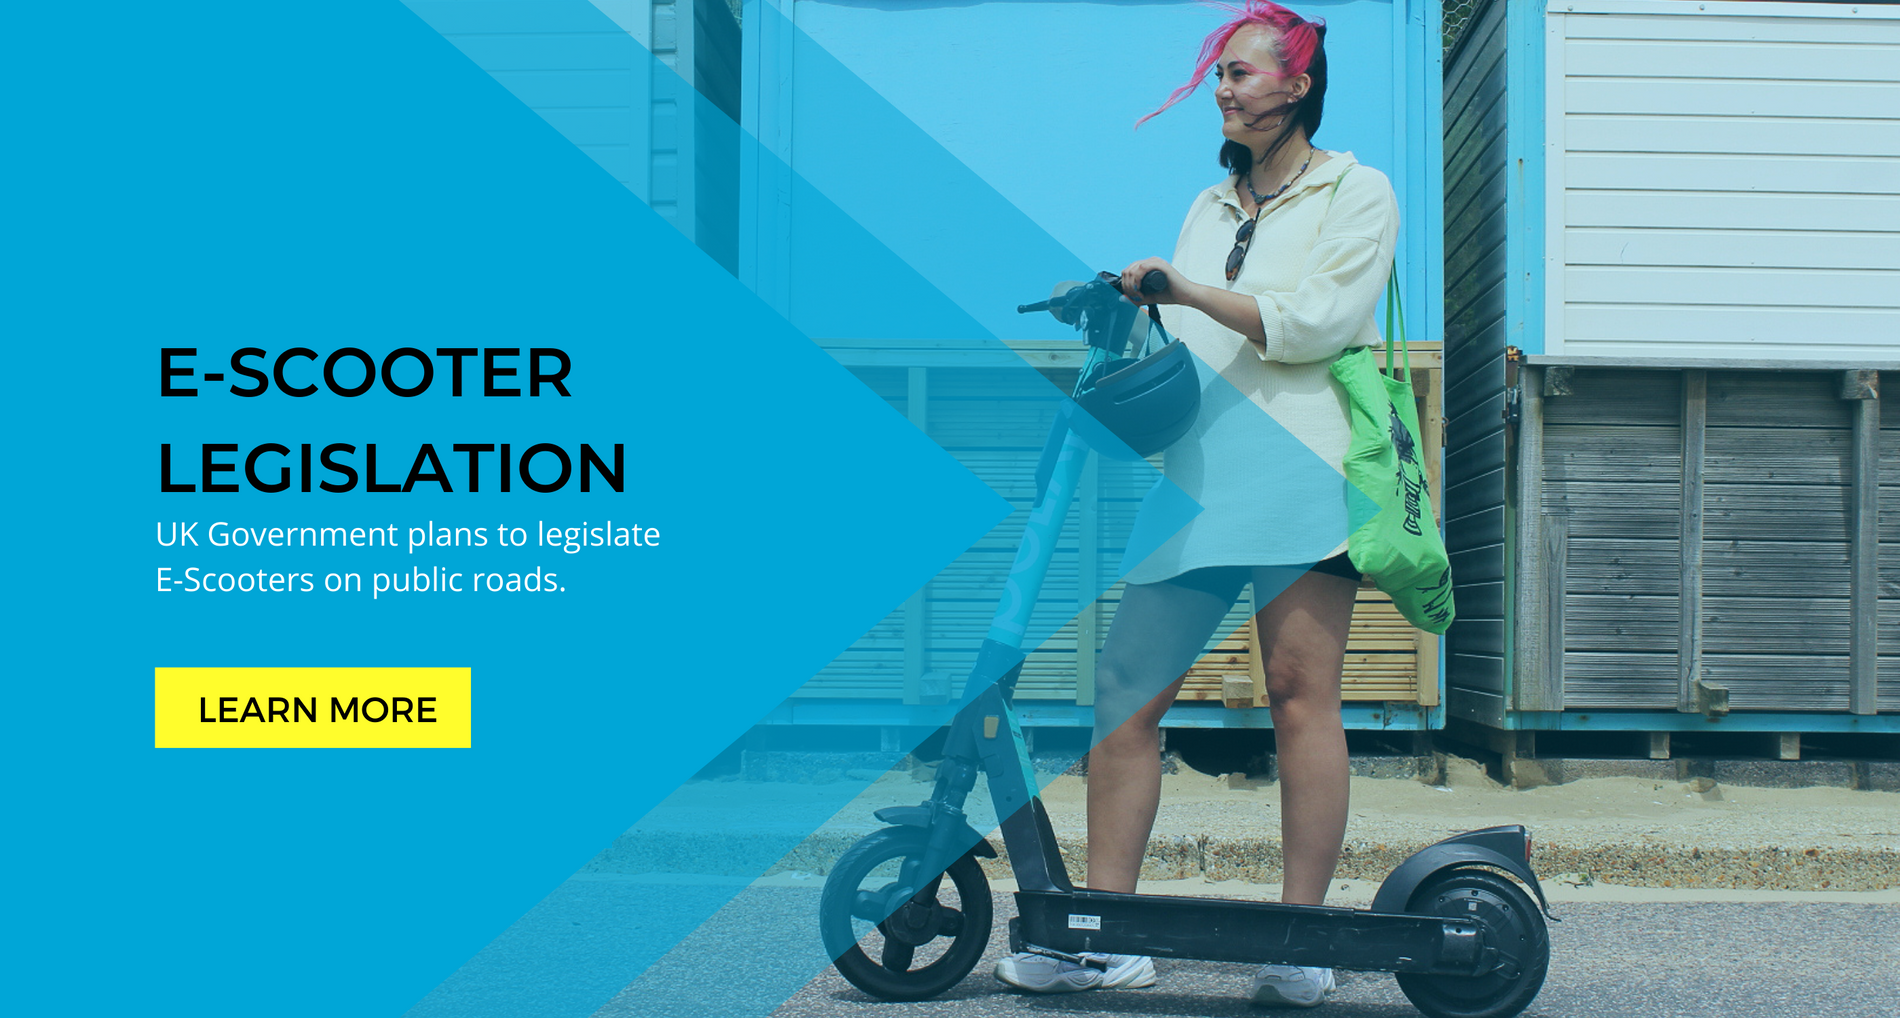 Click here to read about e scooter law change. For updates on the electric scooter legislation check the electric travels page all about e scooter law updates, law change 2022 UK. www.electrictravels.co.uk